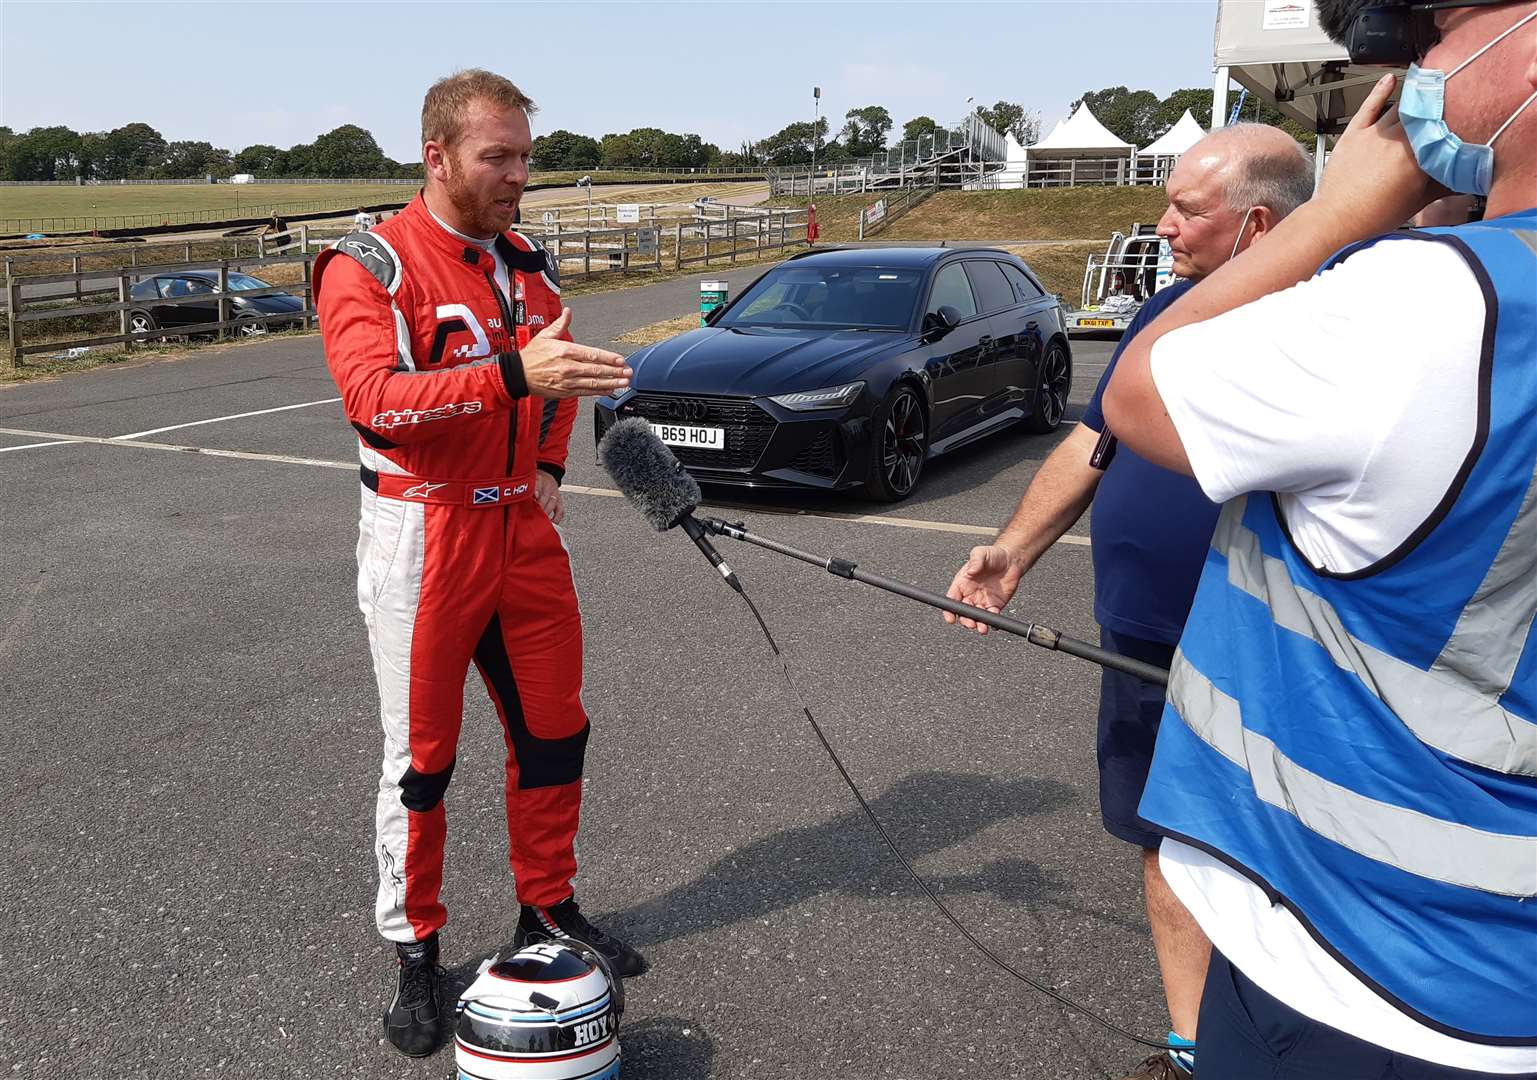 Sir Chris Hoy has tested twice at Lydden